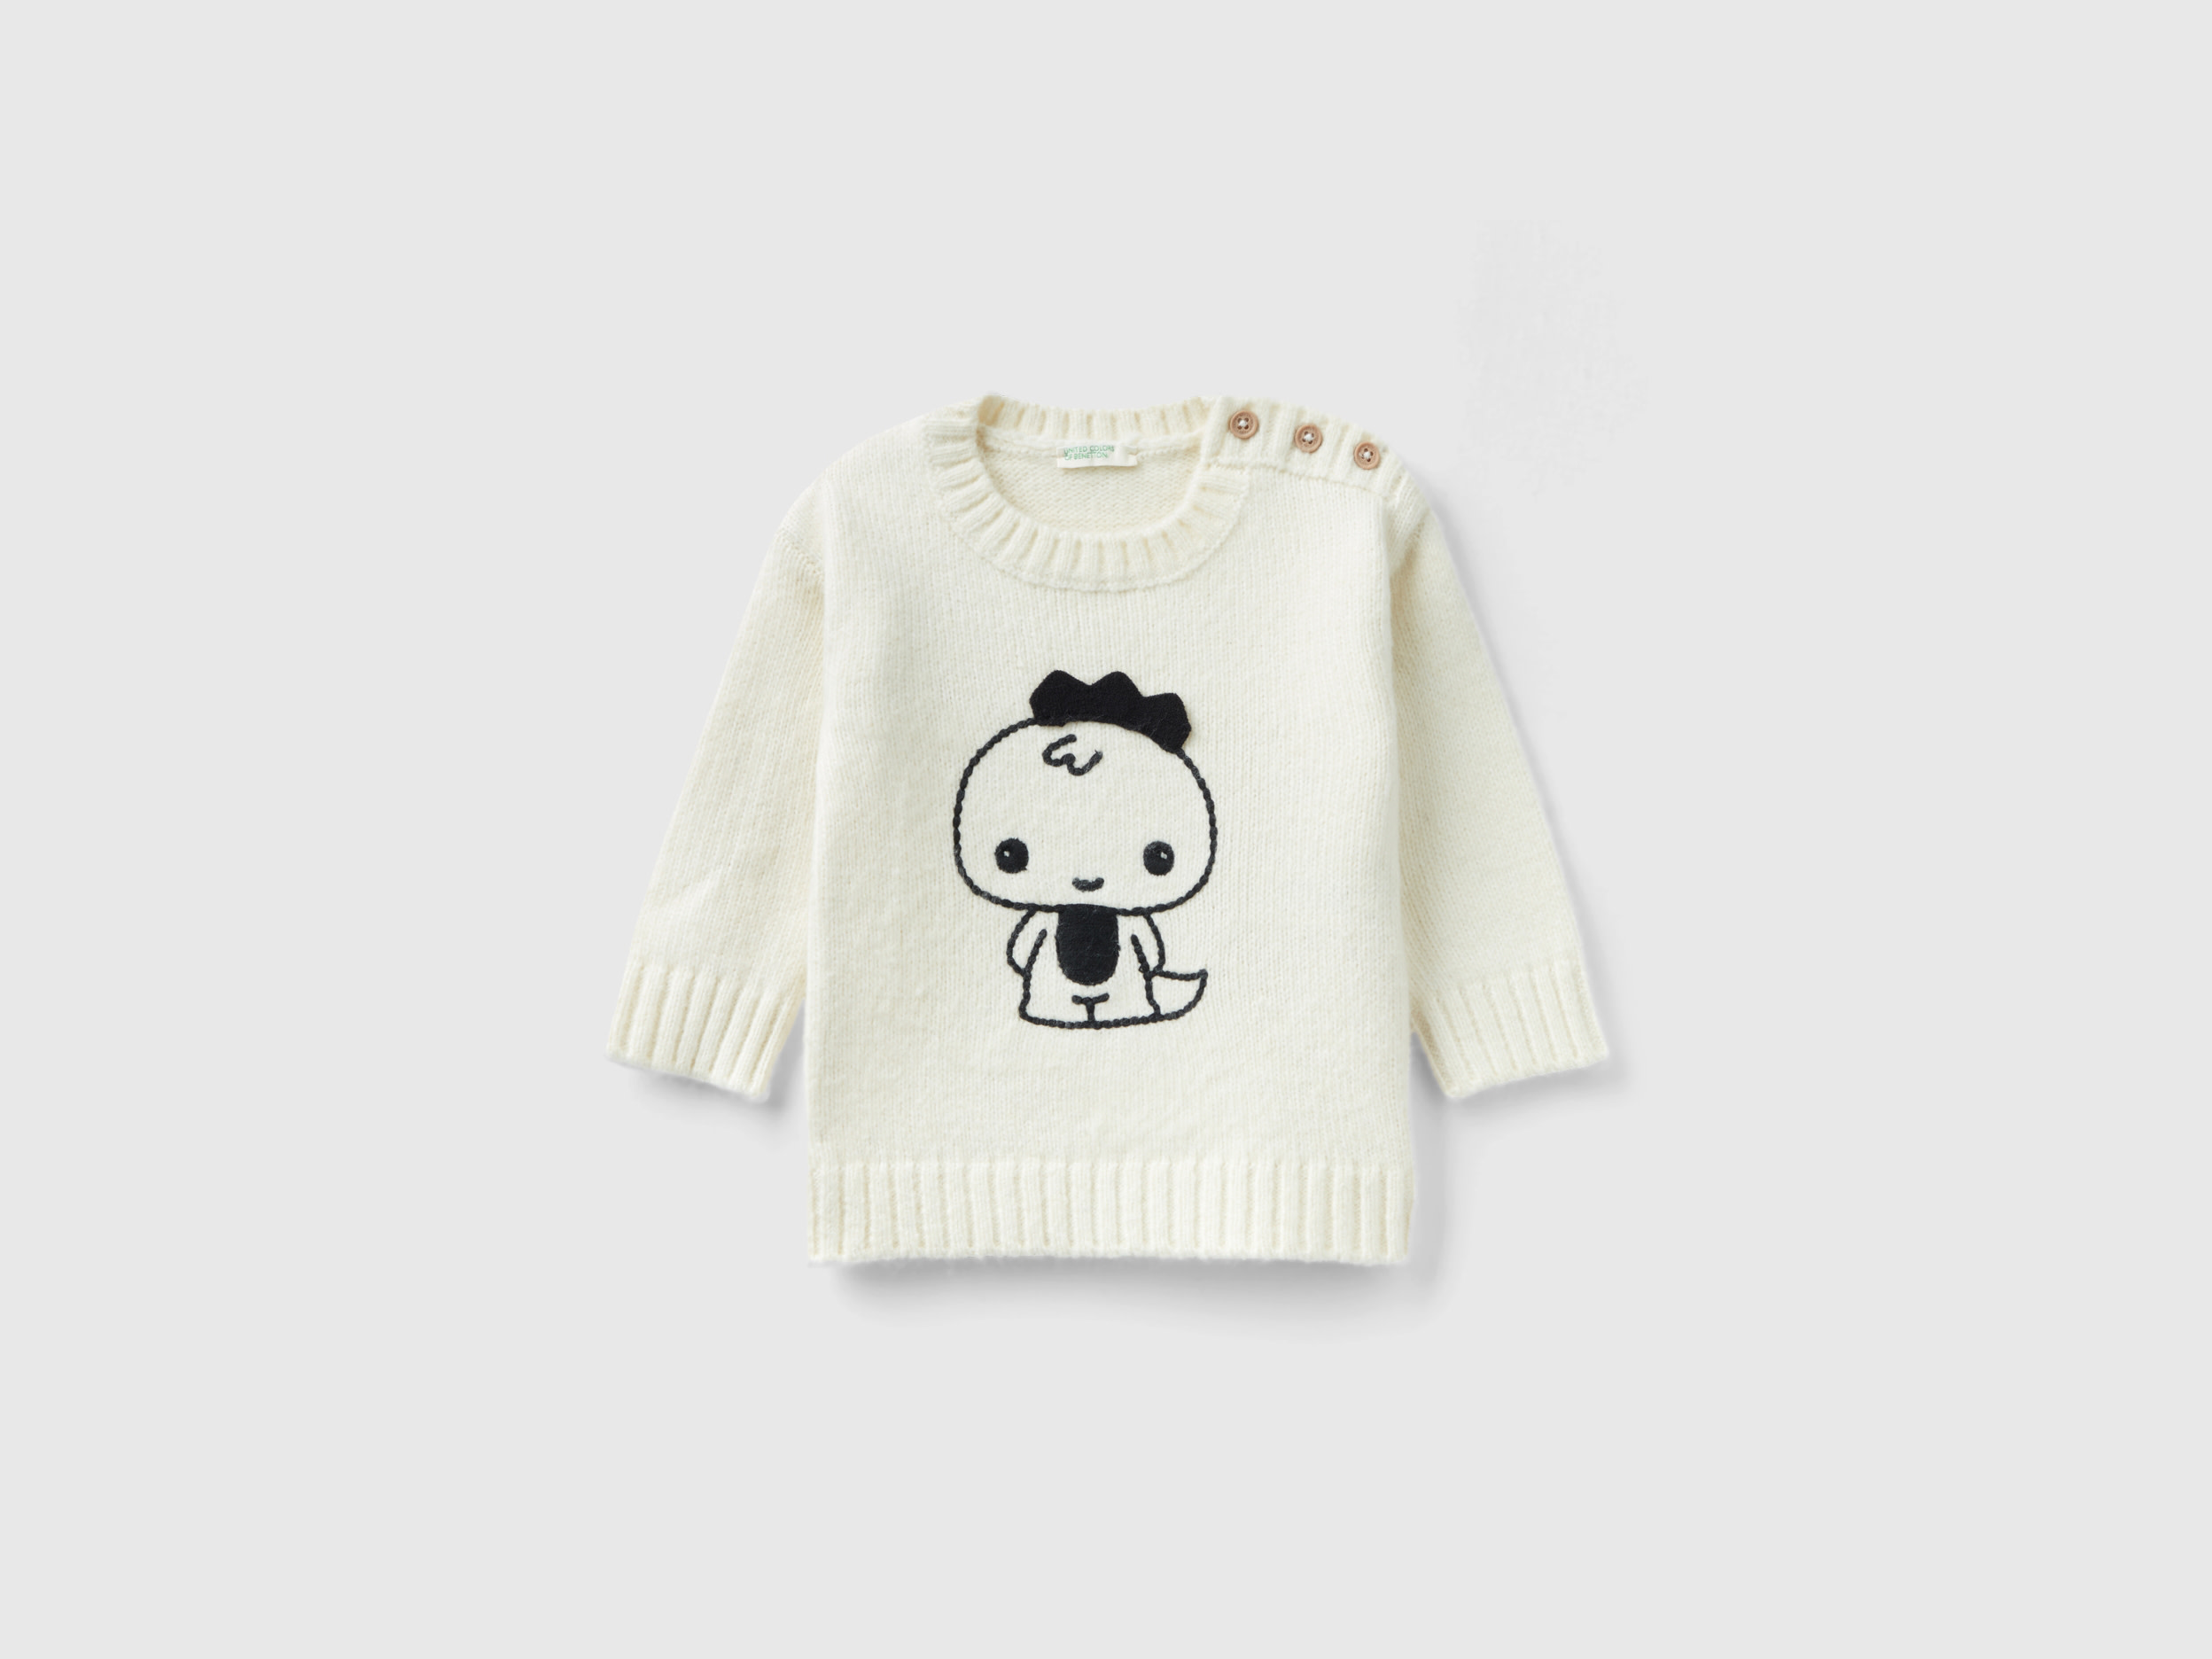 Benetton, Sweater With Embroidery And Applique, size 0-1, Creamy White, Kids